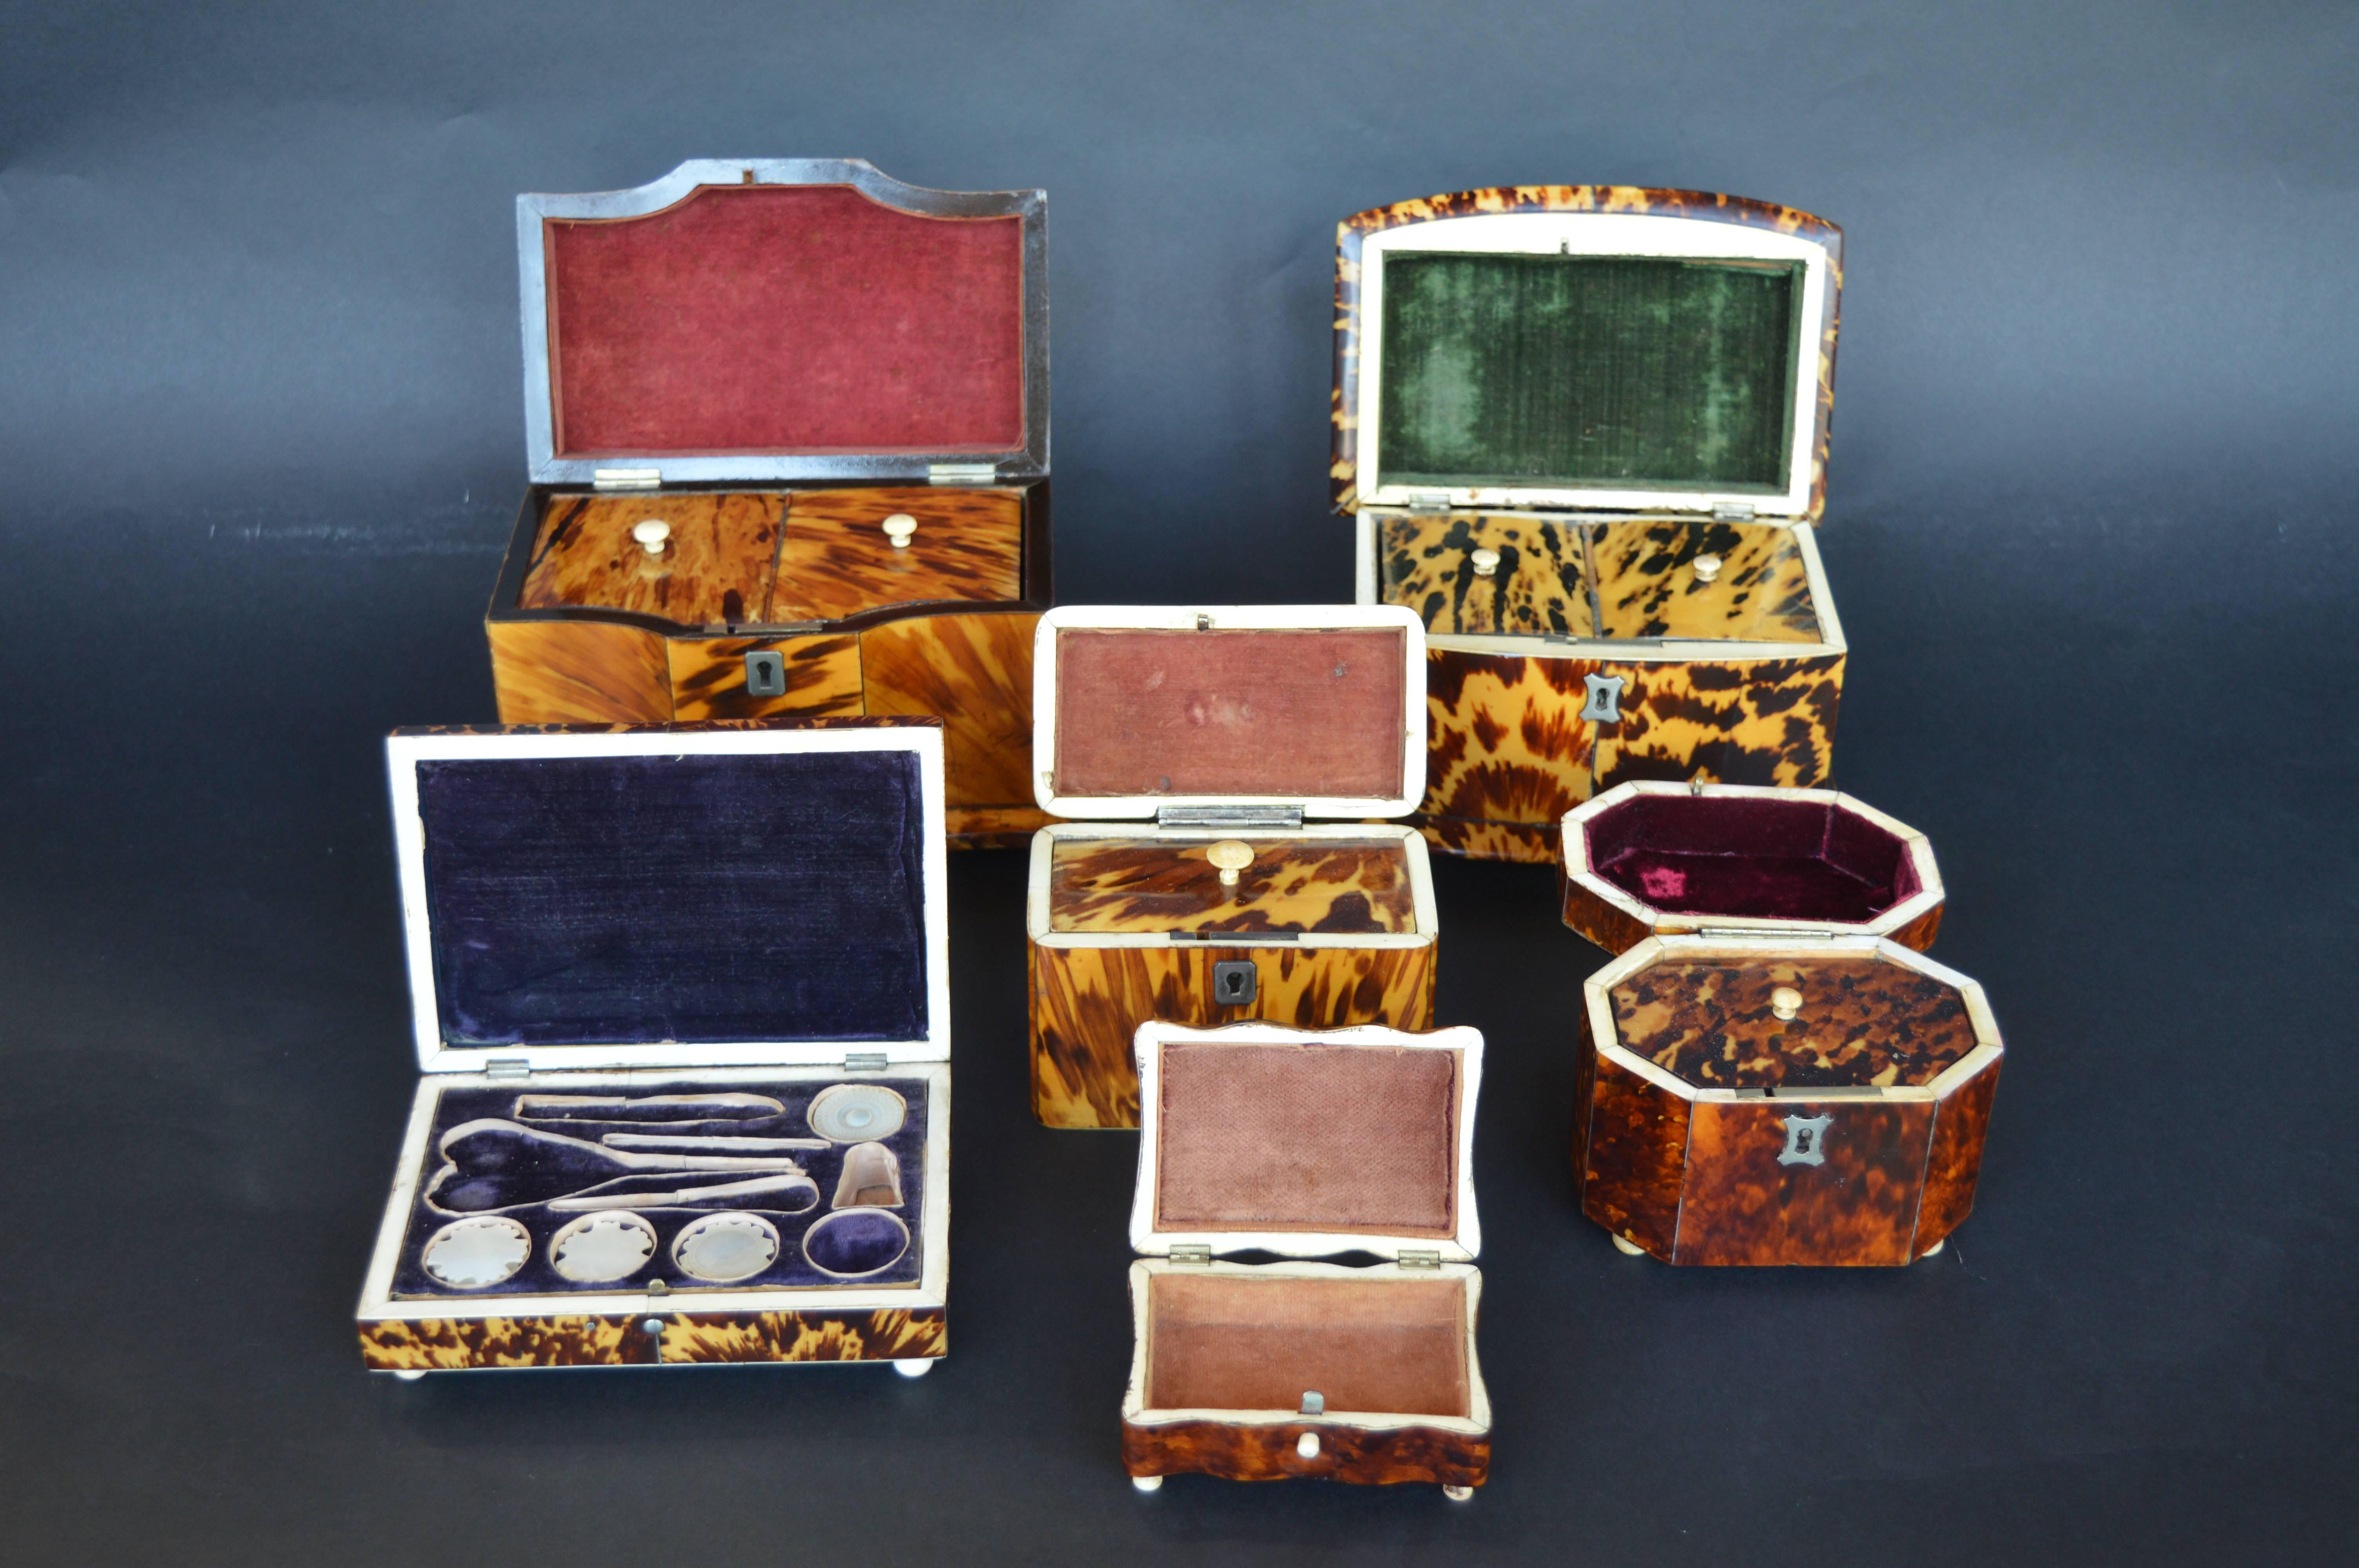 Collection of six 19th century tortoise shell boxes. Each varies in size as well as type of usage. Lined with velvet.

Smallest box measures: 1.25